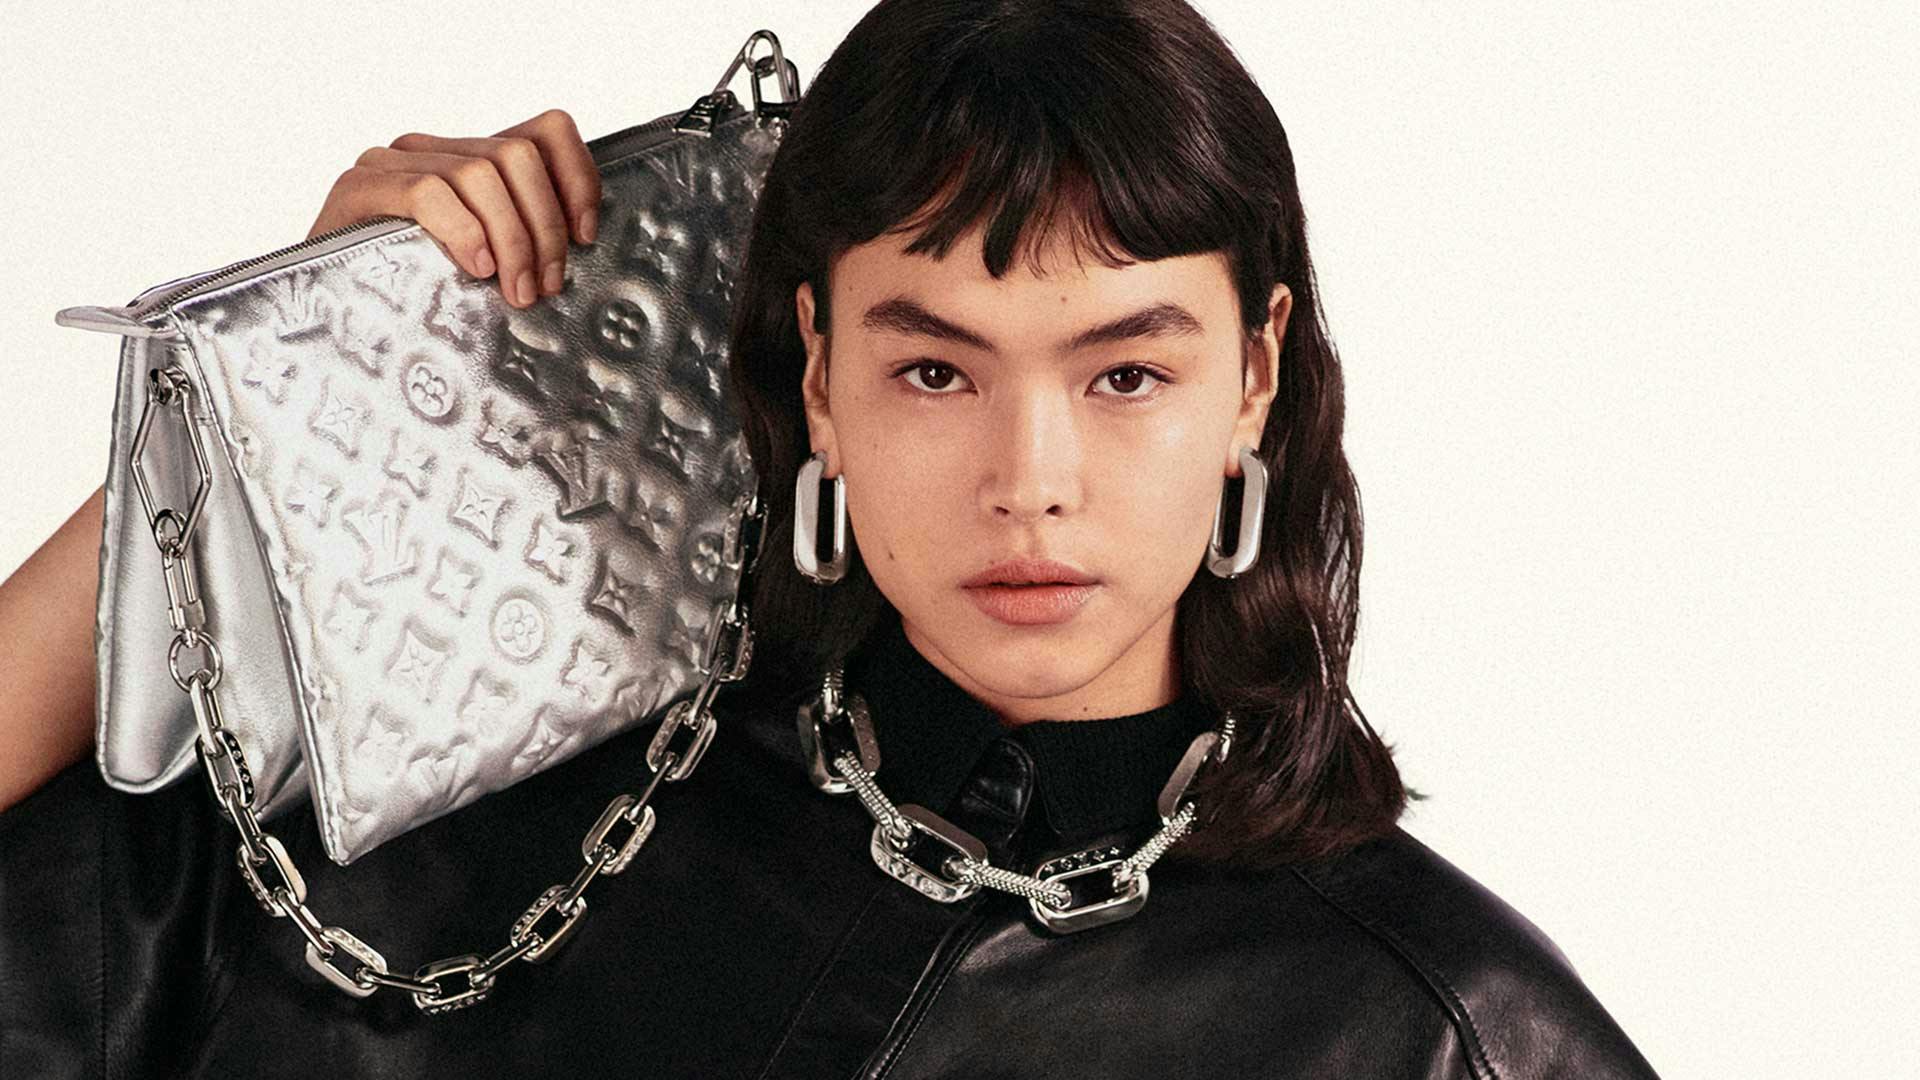 THE IT bag of 2021 or a miss?? Louis Vuitton Coussin MM 